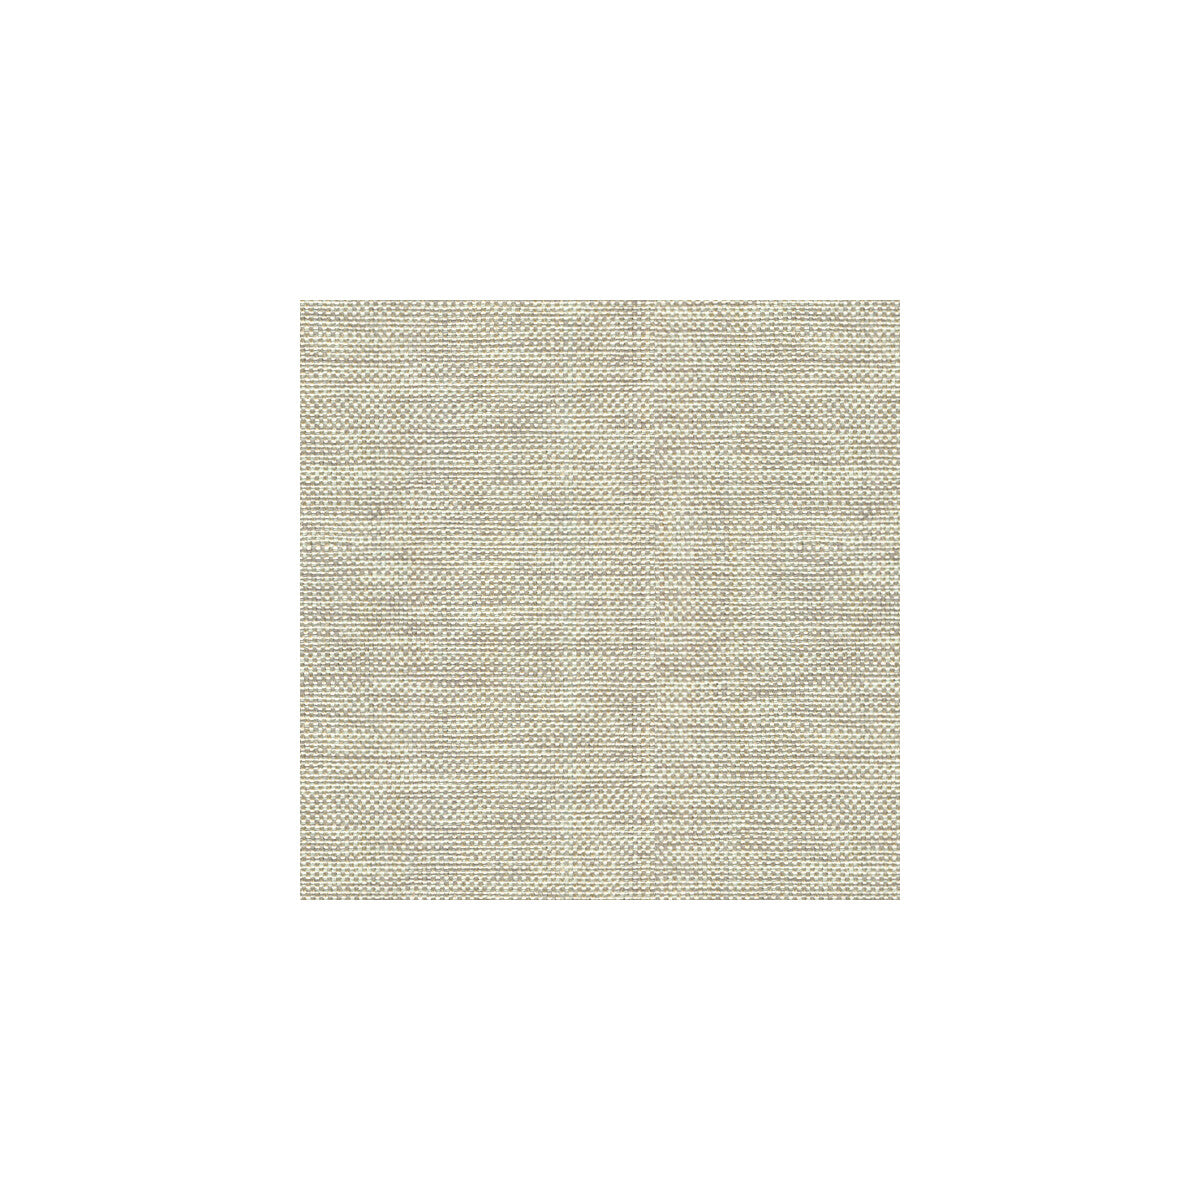 Kravet Basics fabric in 30299-106 color - pattern 30299.106.0 - by Kravet Basics in the Perfect Plains collection